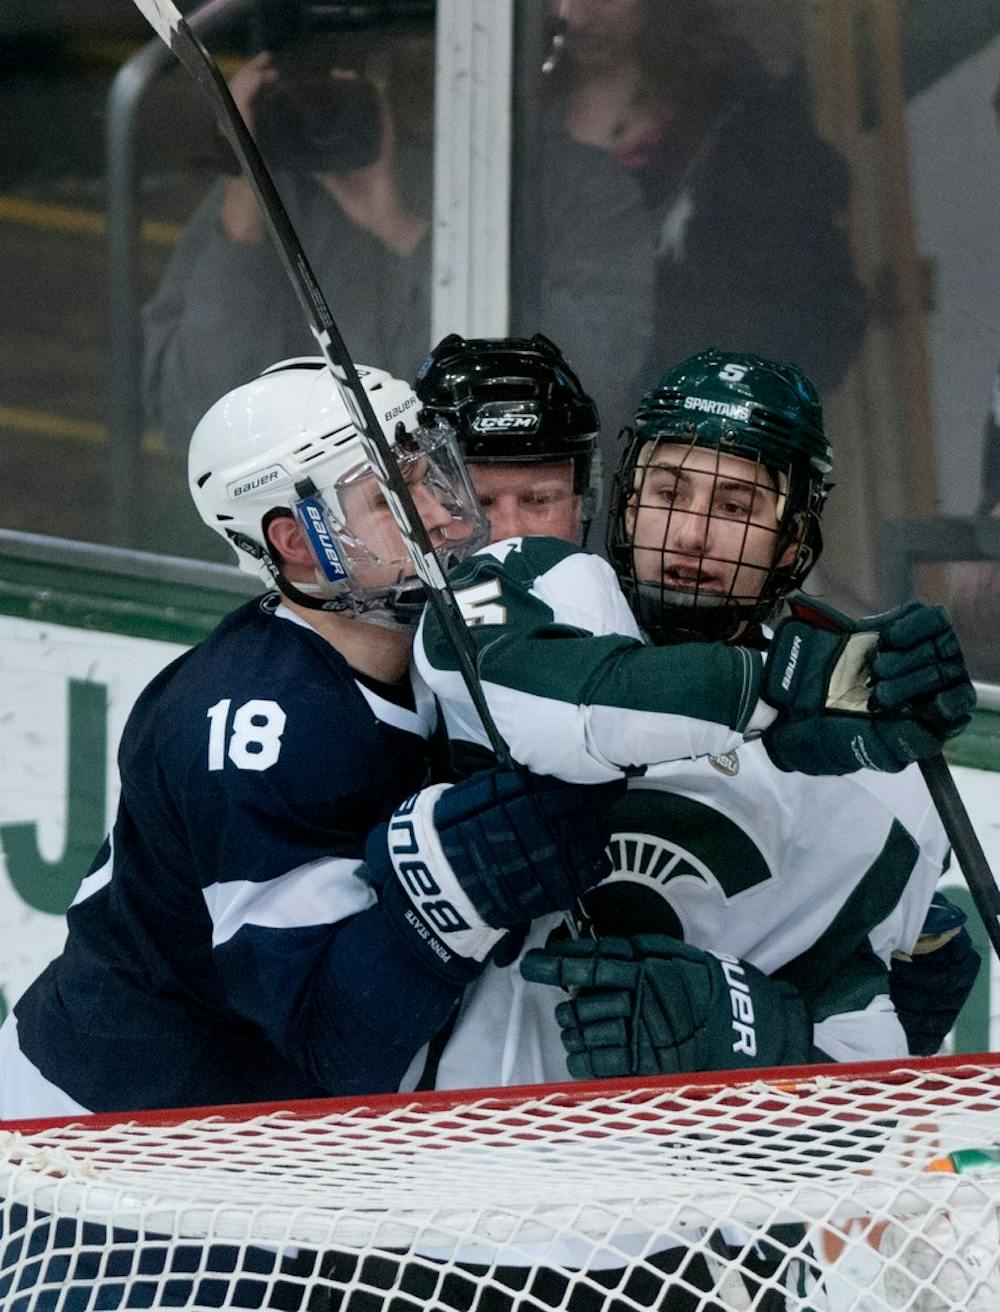 	<p>Penn State forward Casey Bailey and sophomore left defender R.J. Boyd are broken up by a referee  Jan. 25, 2013, at Munn Ice Arena. The final score was 5-3, with the Spartans taking the win. Katie Stiefel/The State News</p>